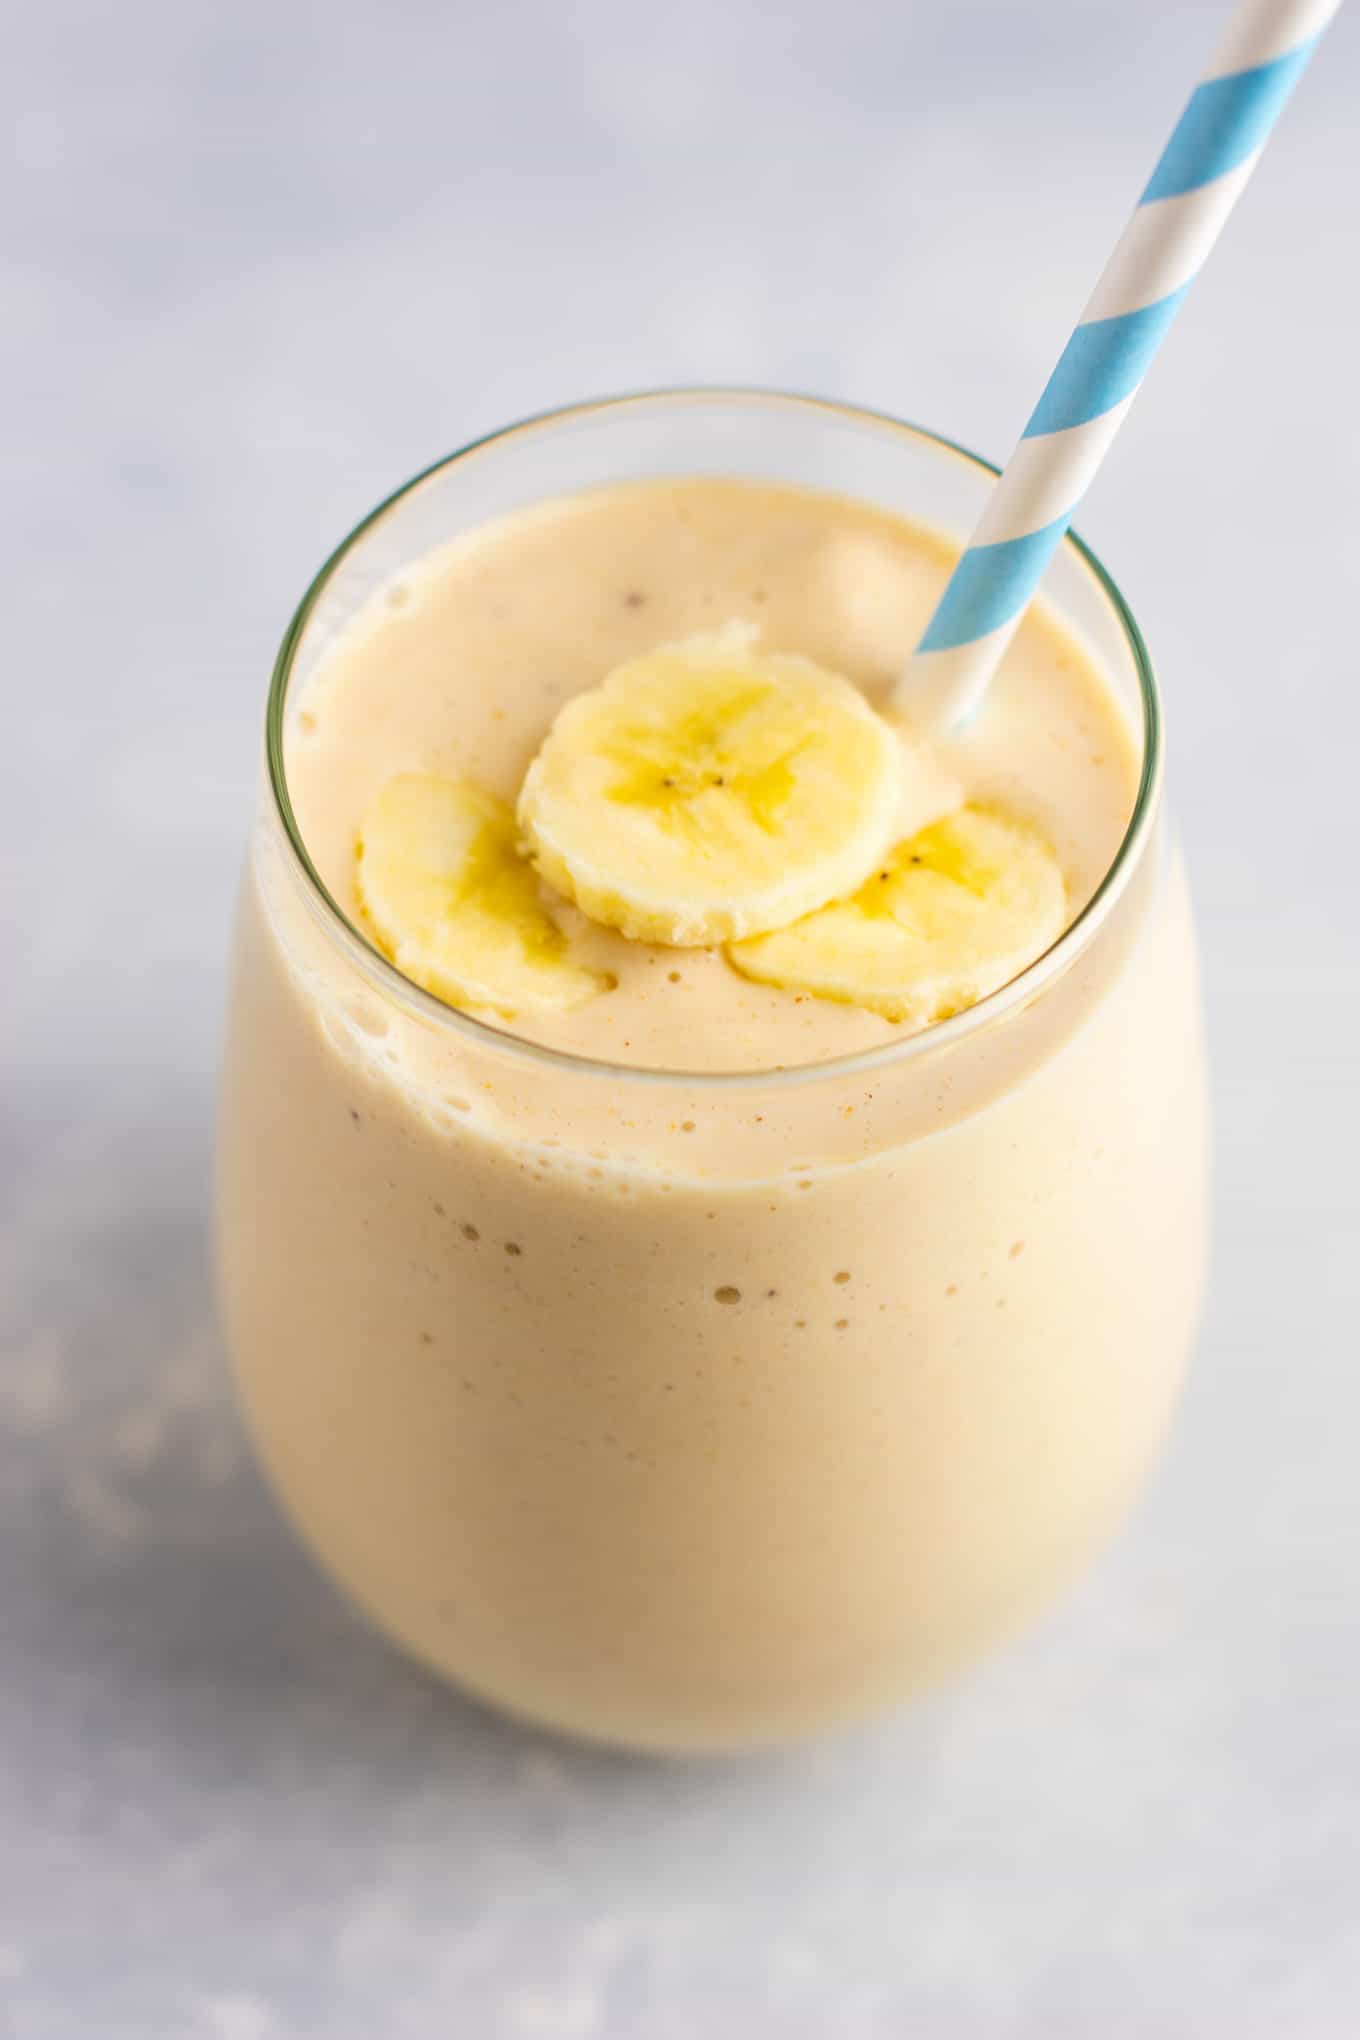 The Best Peanut Butter Banana Smoothie